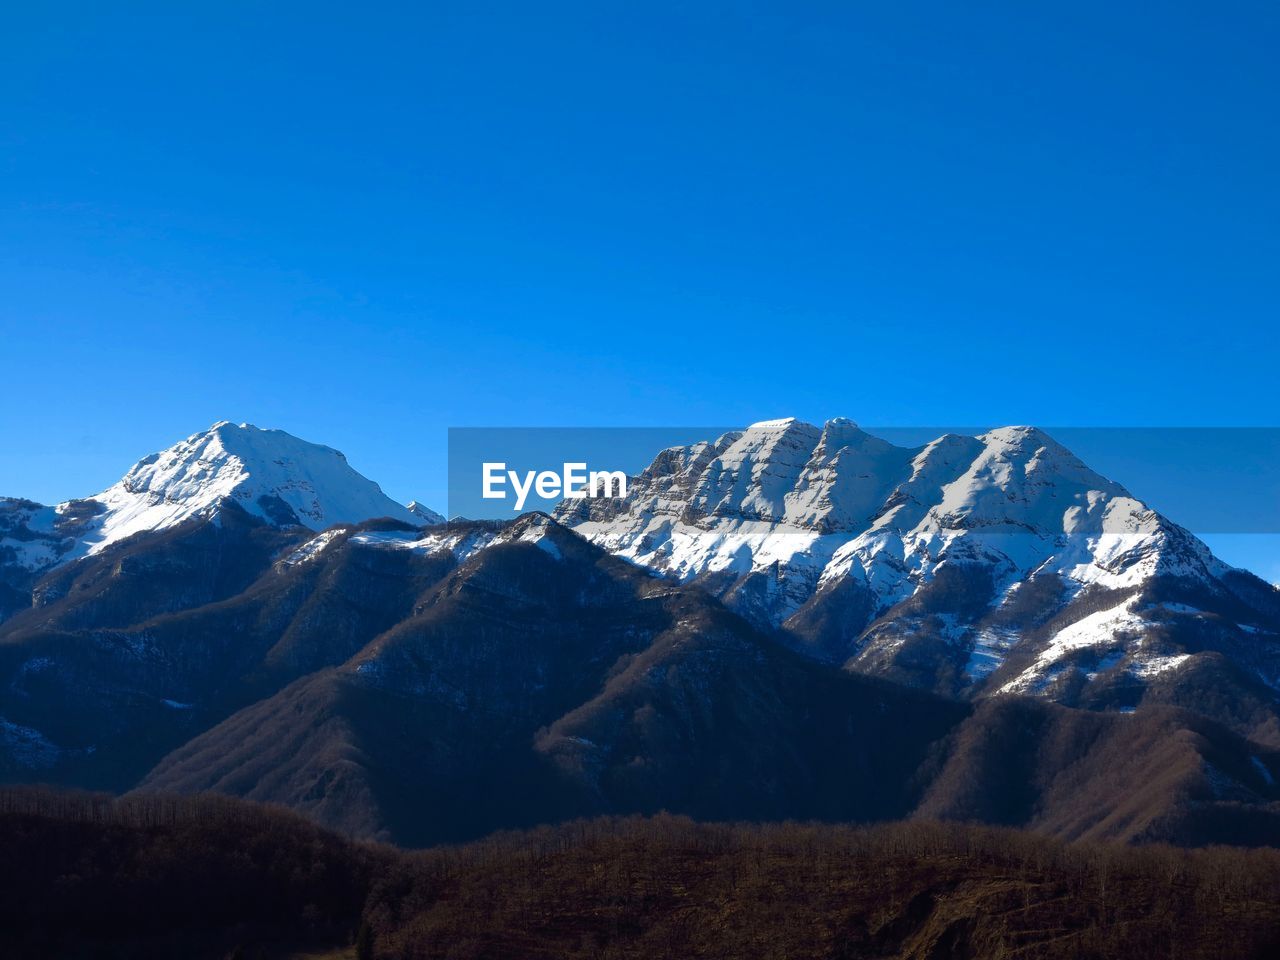 SCENIC VIEW OF MOUNTAINS AGAINST CLEAR BLUE SKY